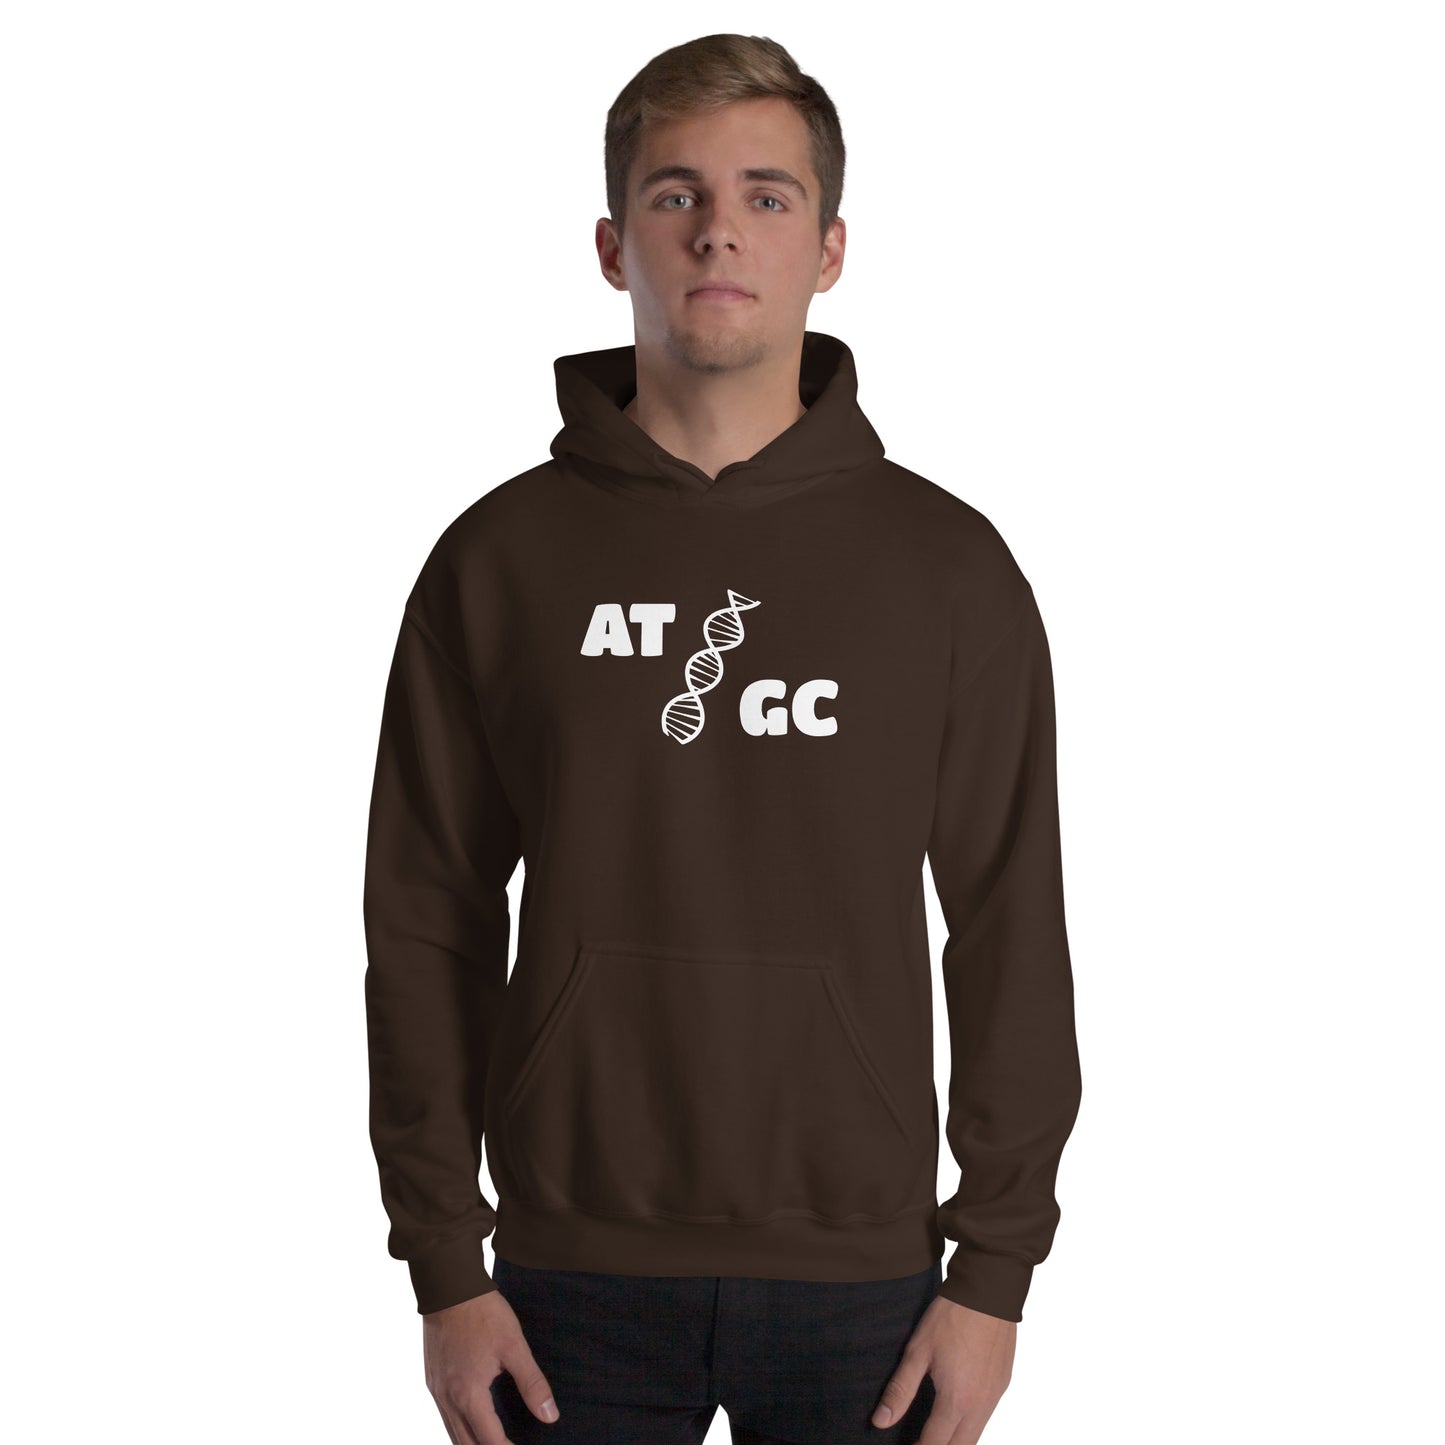 Men with dark brown hoodie with image of a DNA string and the text "ATGC"